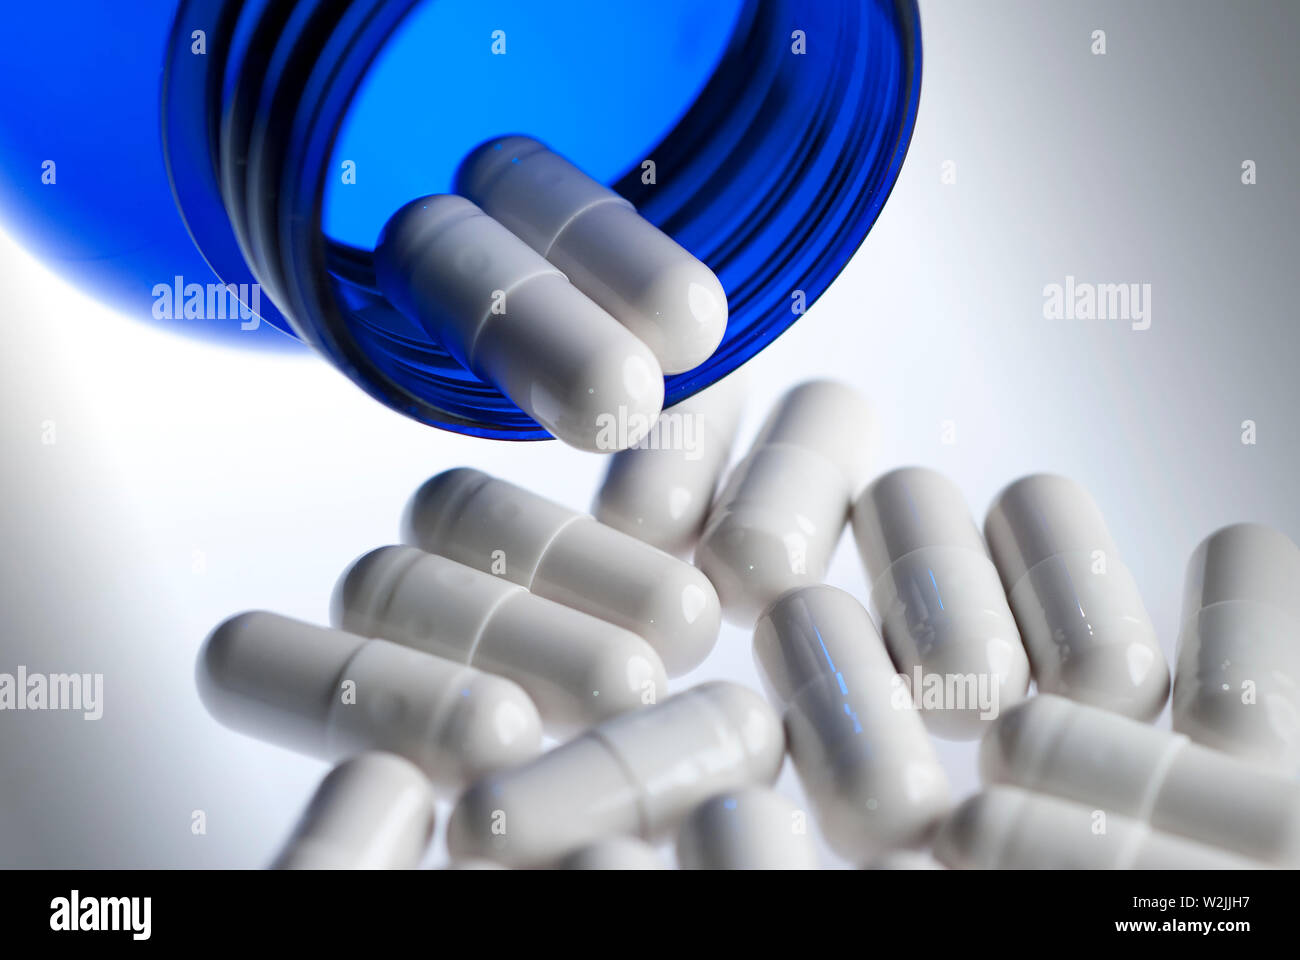 Medical pills spilling out of a blue bottle Stock Photo